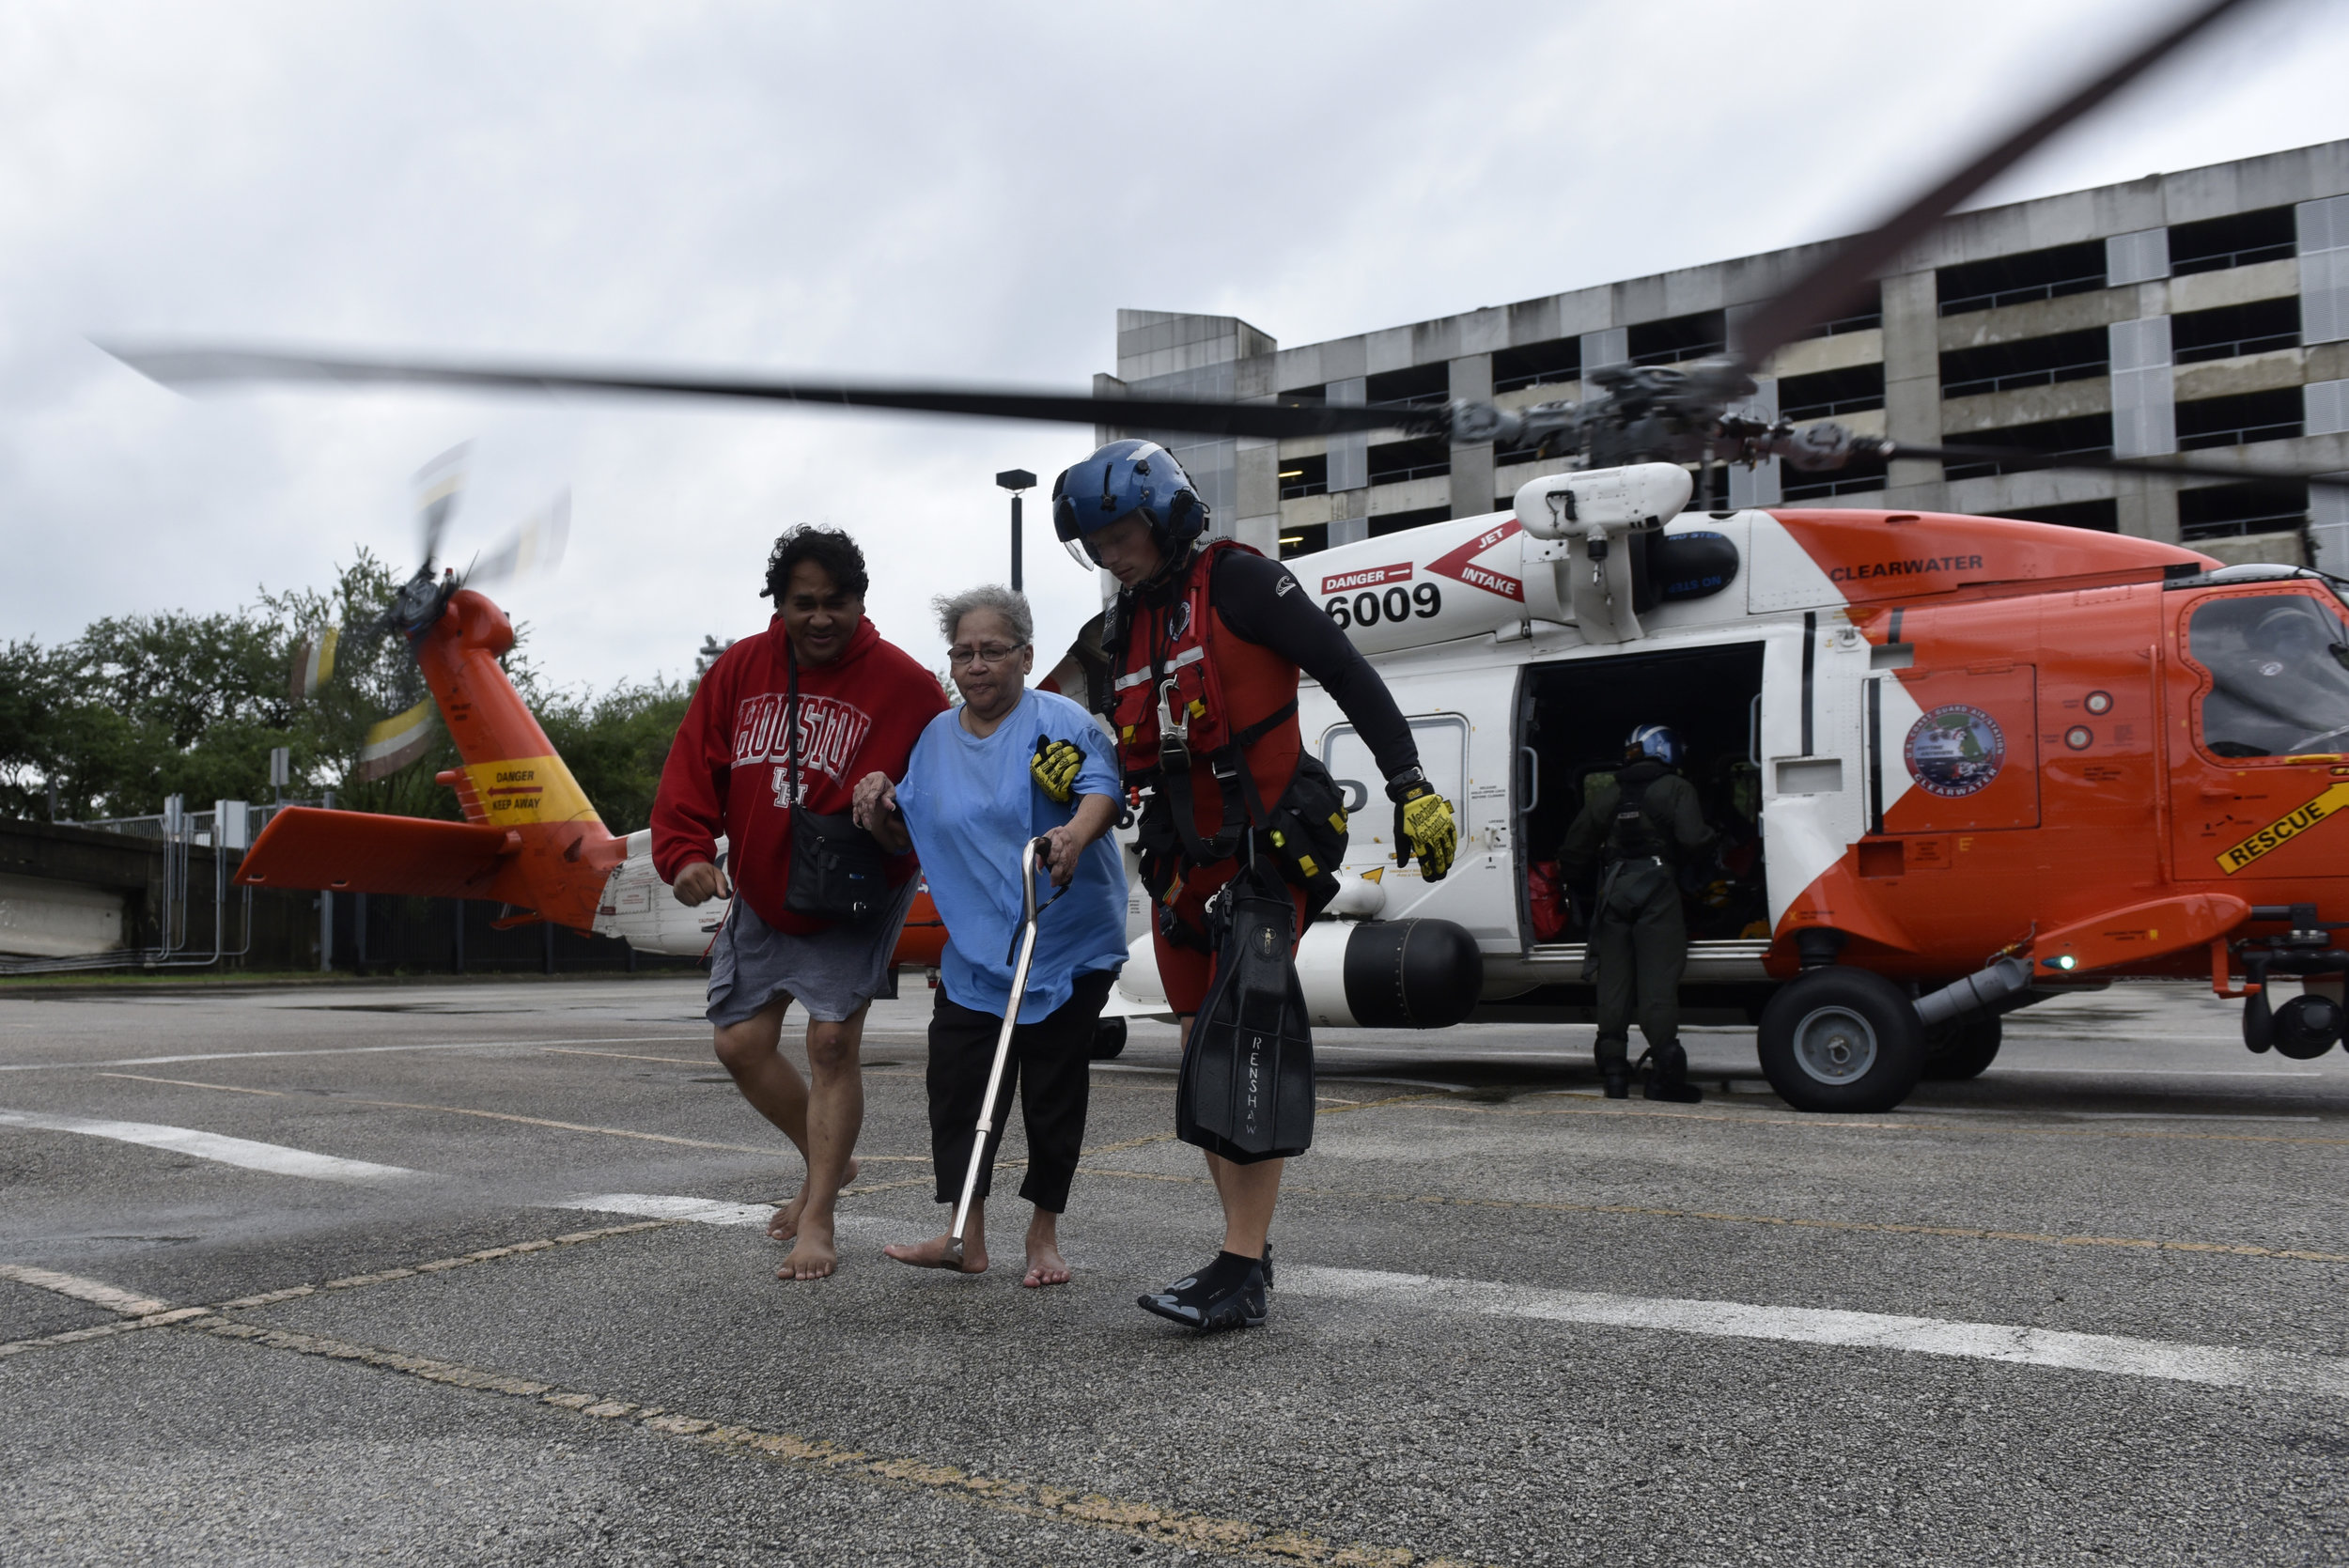  Evacuees Rickey Manuel (L) and Marjory Manuel (C) exit a U.S. Coast Guard helicopter that rescued them after Hurricane Harvey inundated the Texas Gulf coast with rain and flooded their home, in Houston, Texas, U.S. August 27, 2017.  REUTERS/Nick Oxf